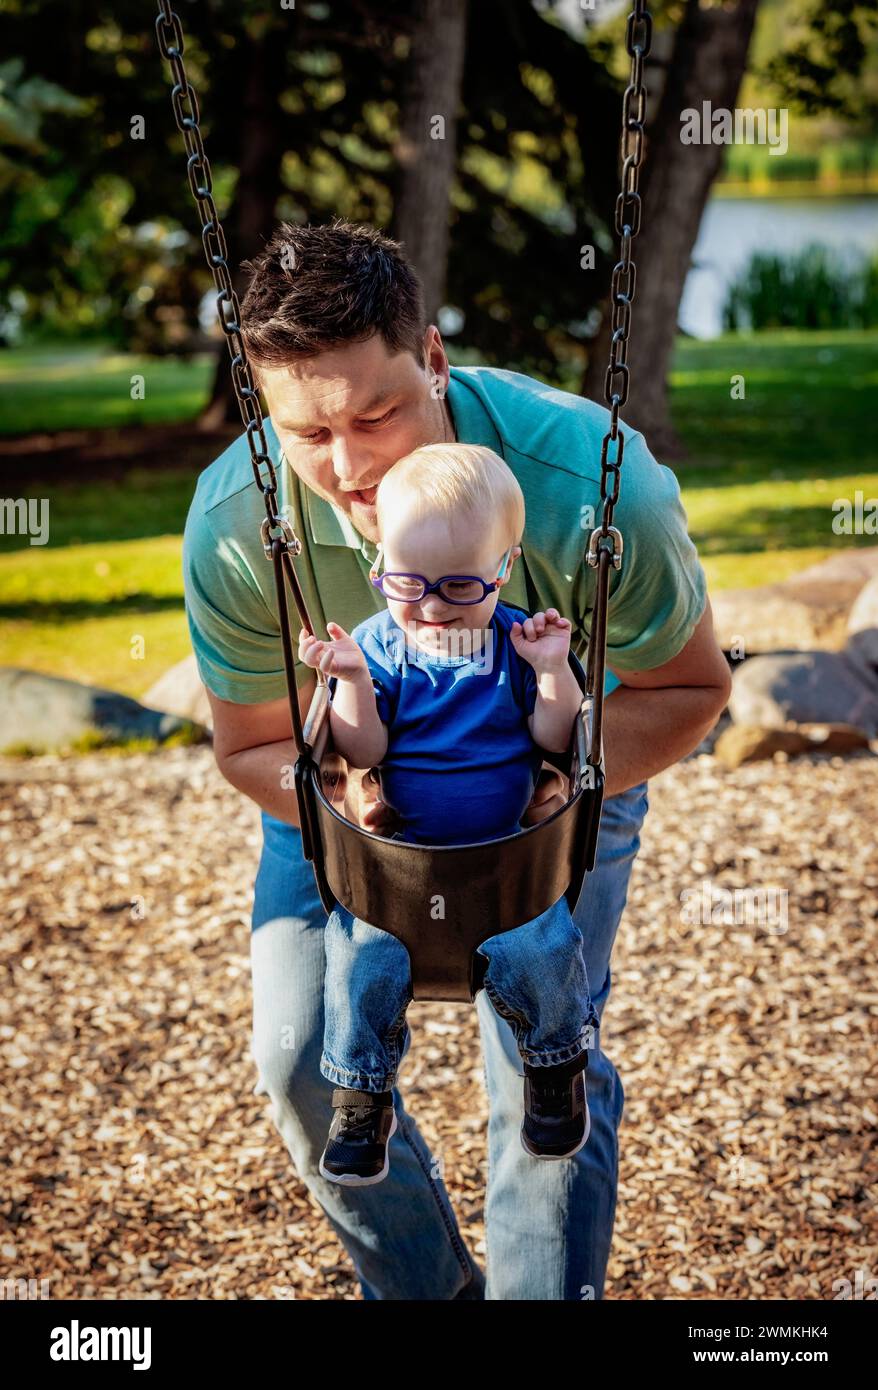 Father spending quality time with his son who has Down Syndrome, pushing him on a swing in a city park, during a warm fall afternoon Stock Photo